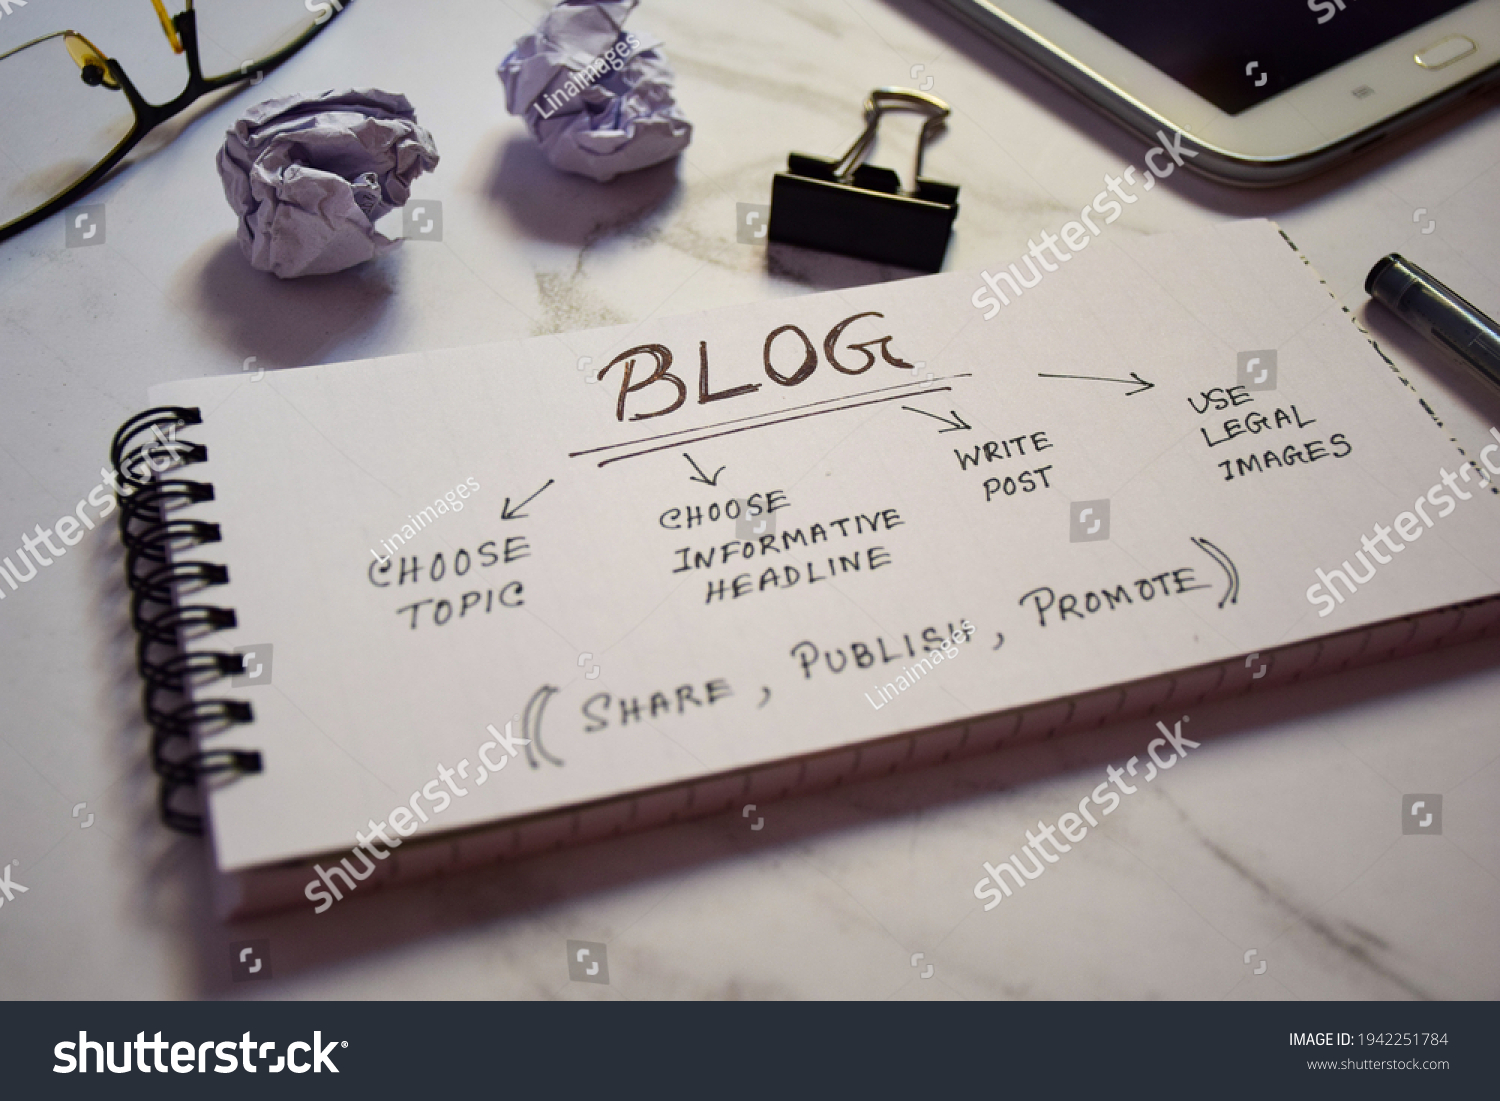 Blog Post writing tips for beginners handwritten in notepad with tablet, pen, paper binder, spectacle and crumbled paper balls. Conceptual, selective focus on the text. #1942251784